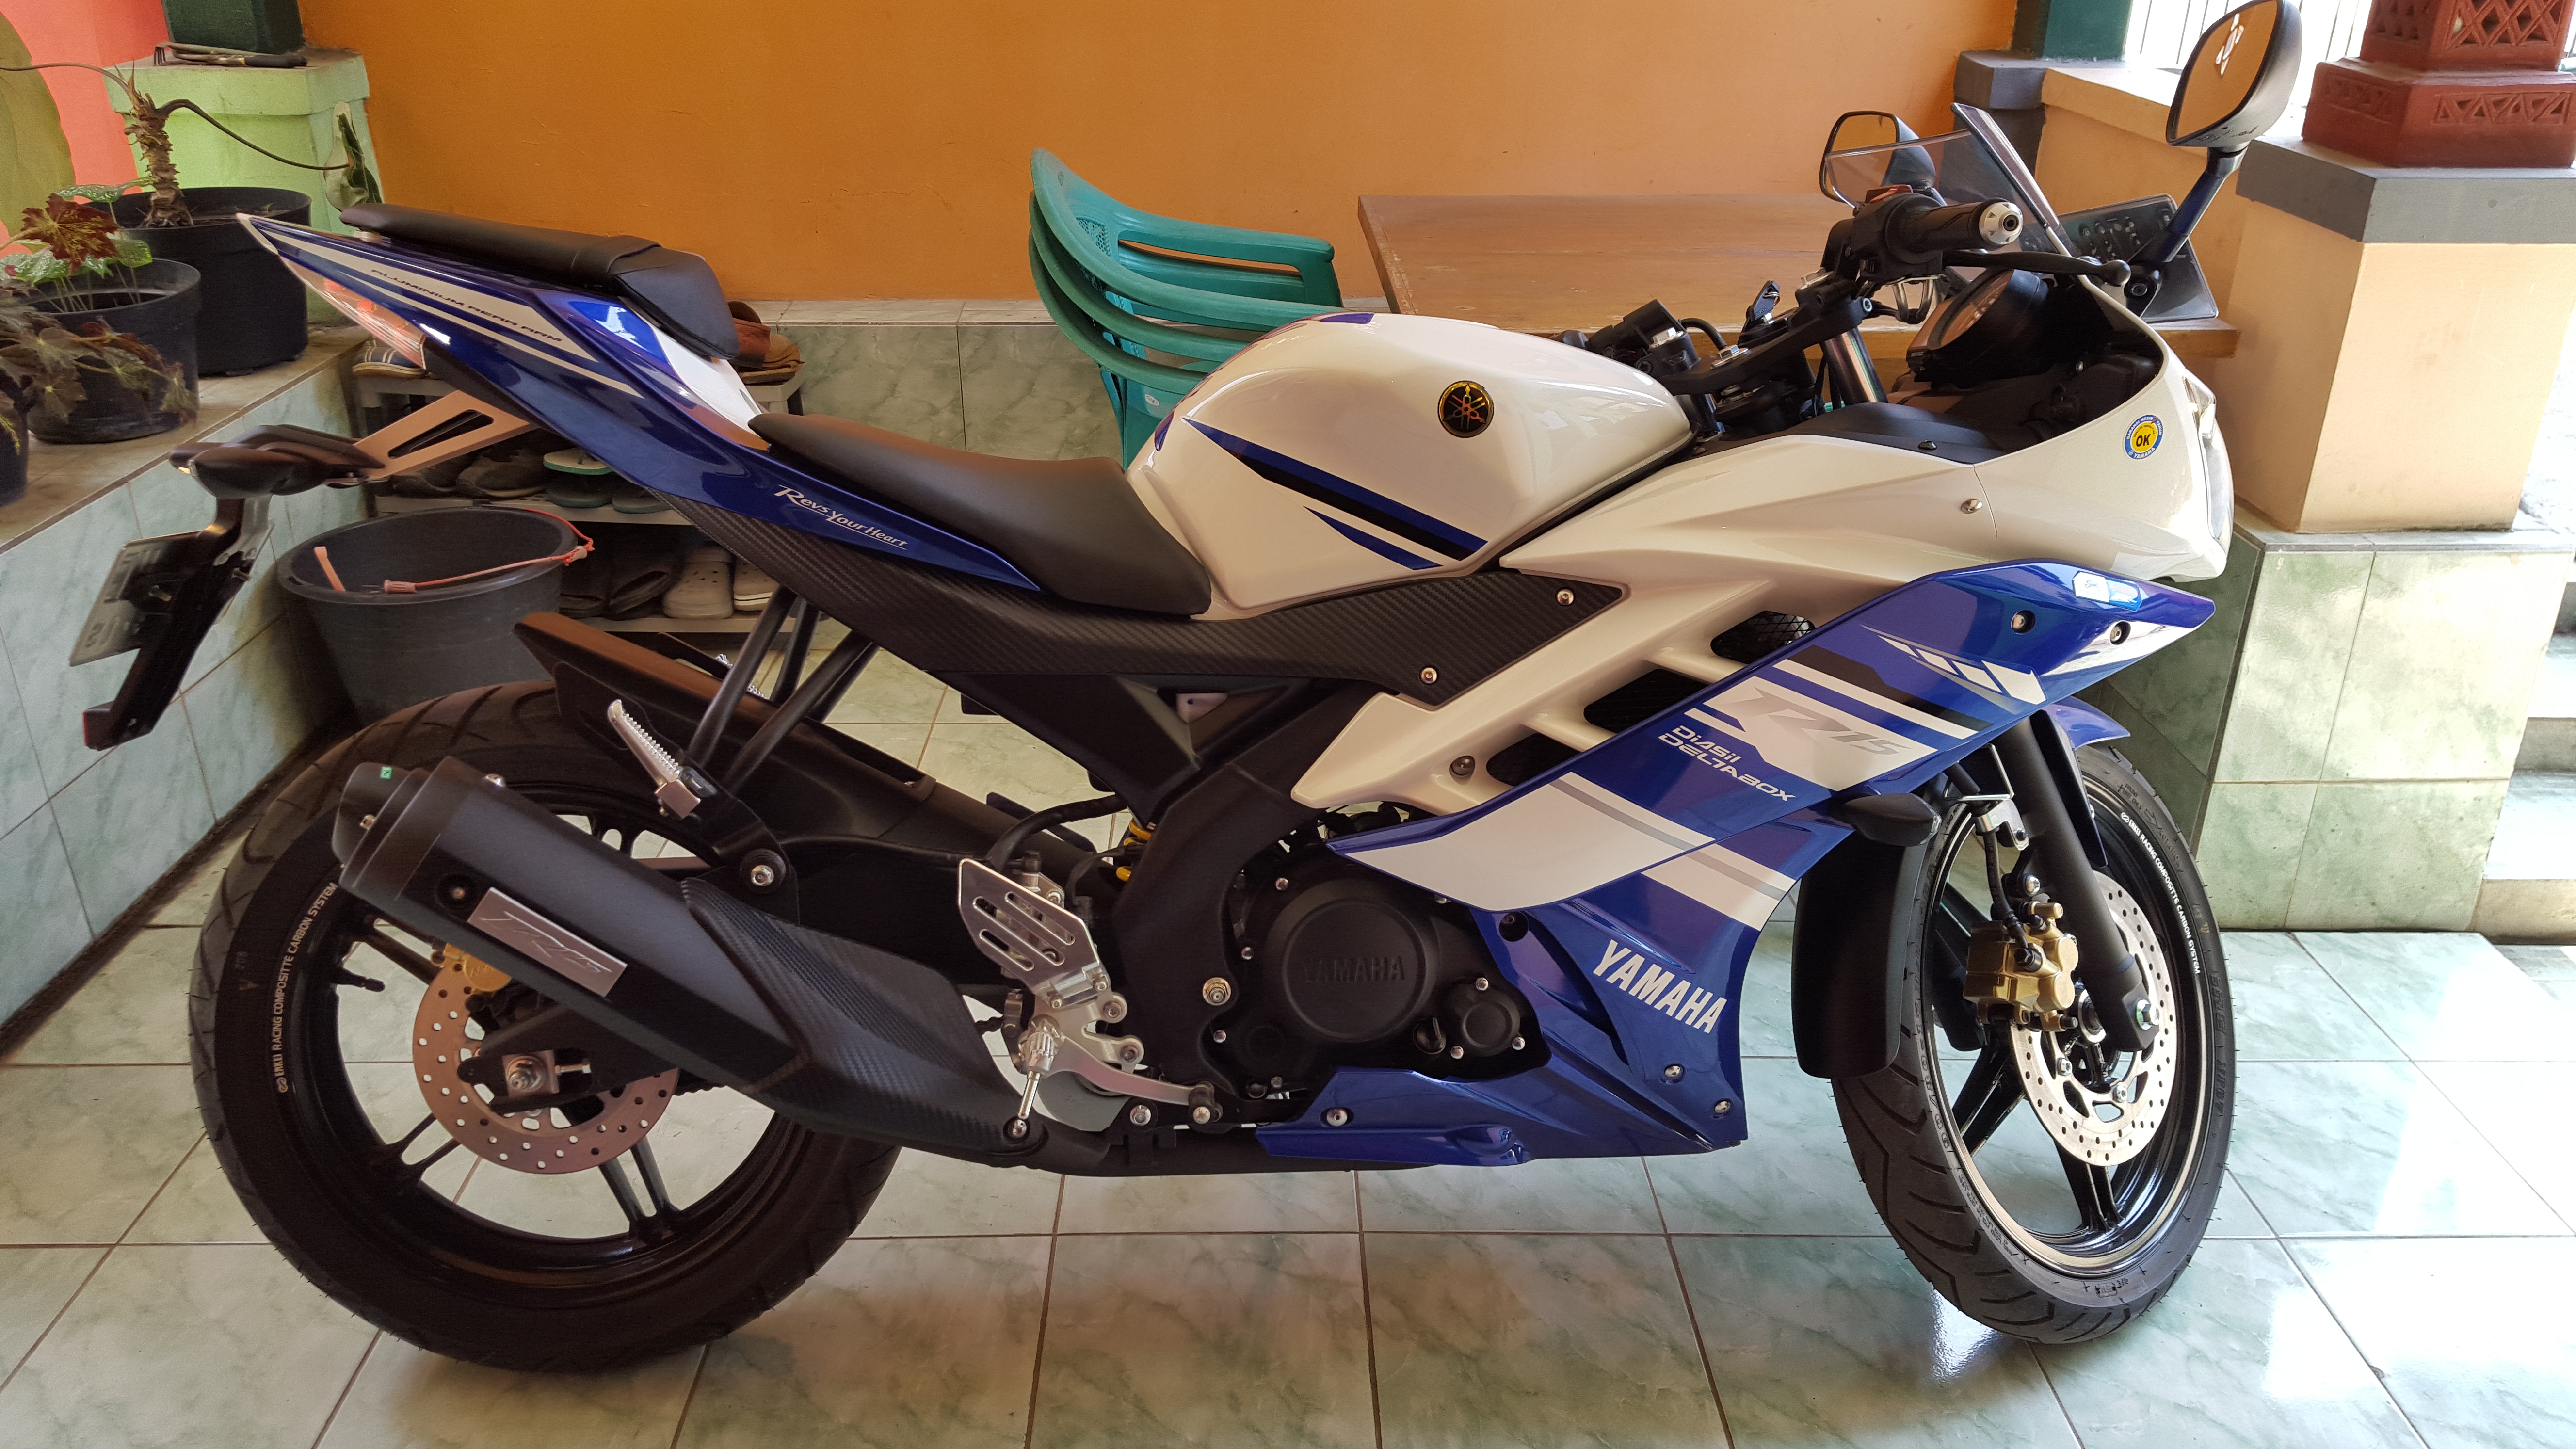 Yamaha Yzf R15 A Place To Share My Experiences